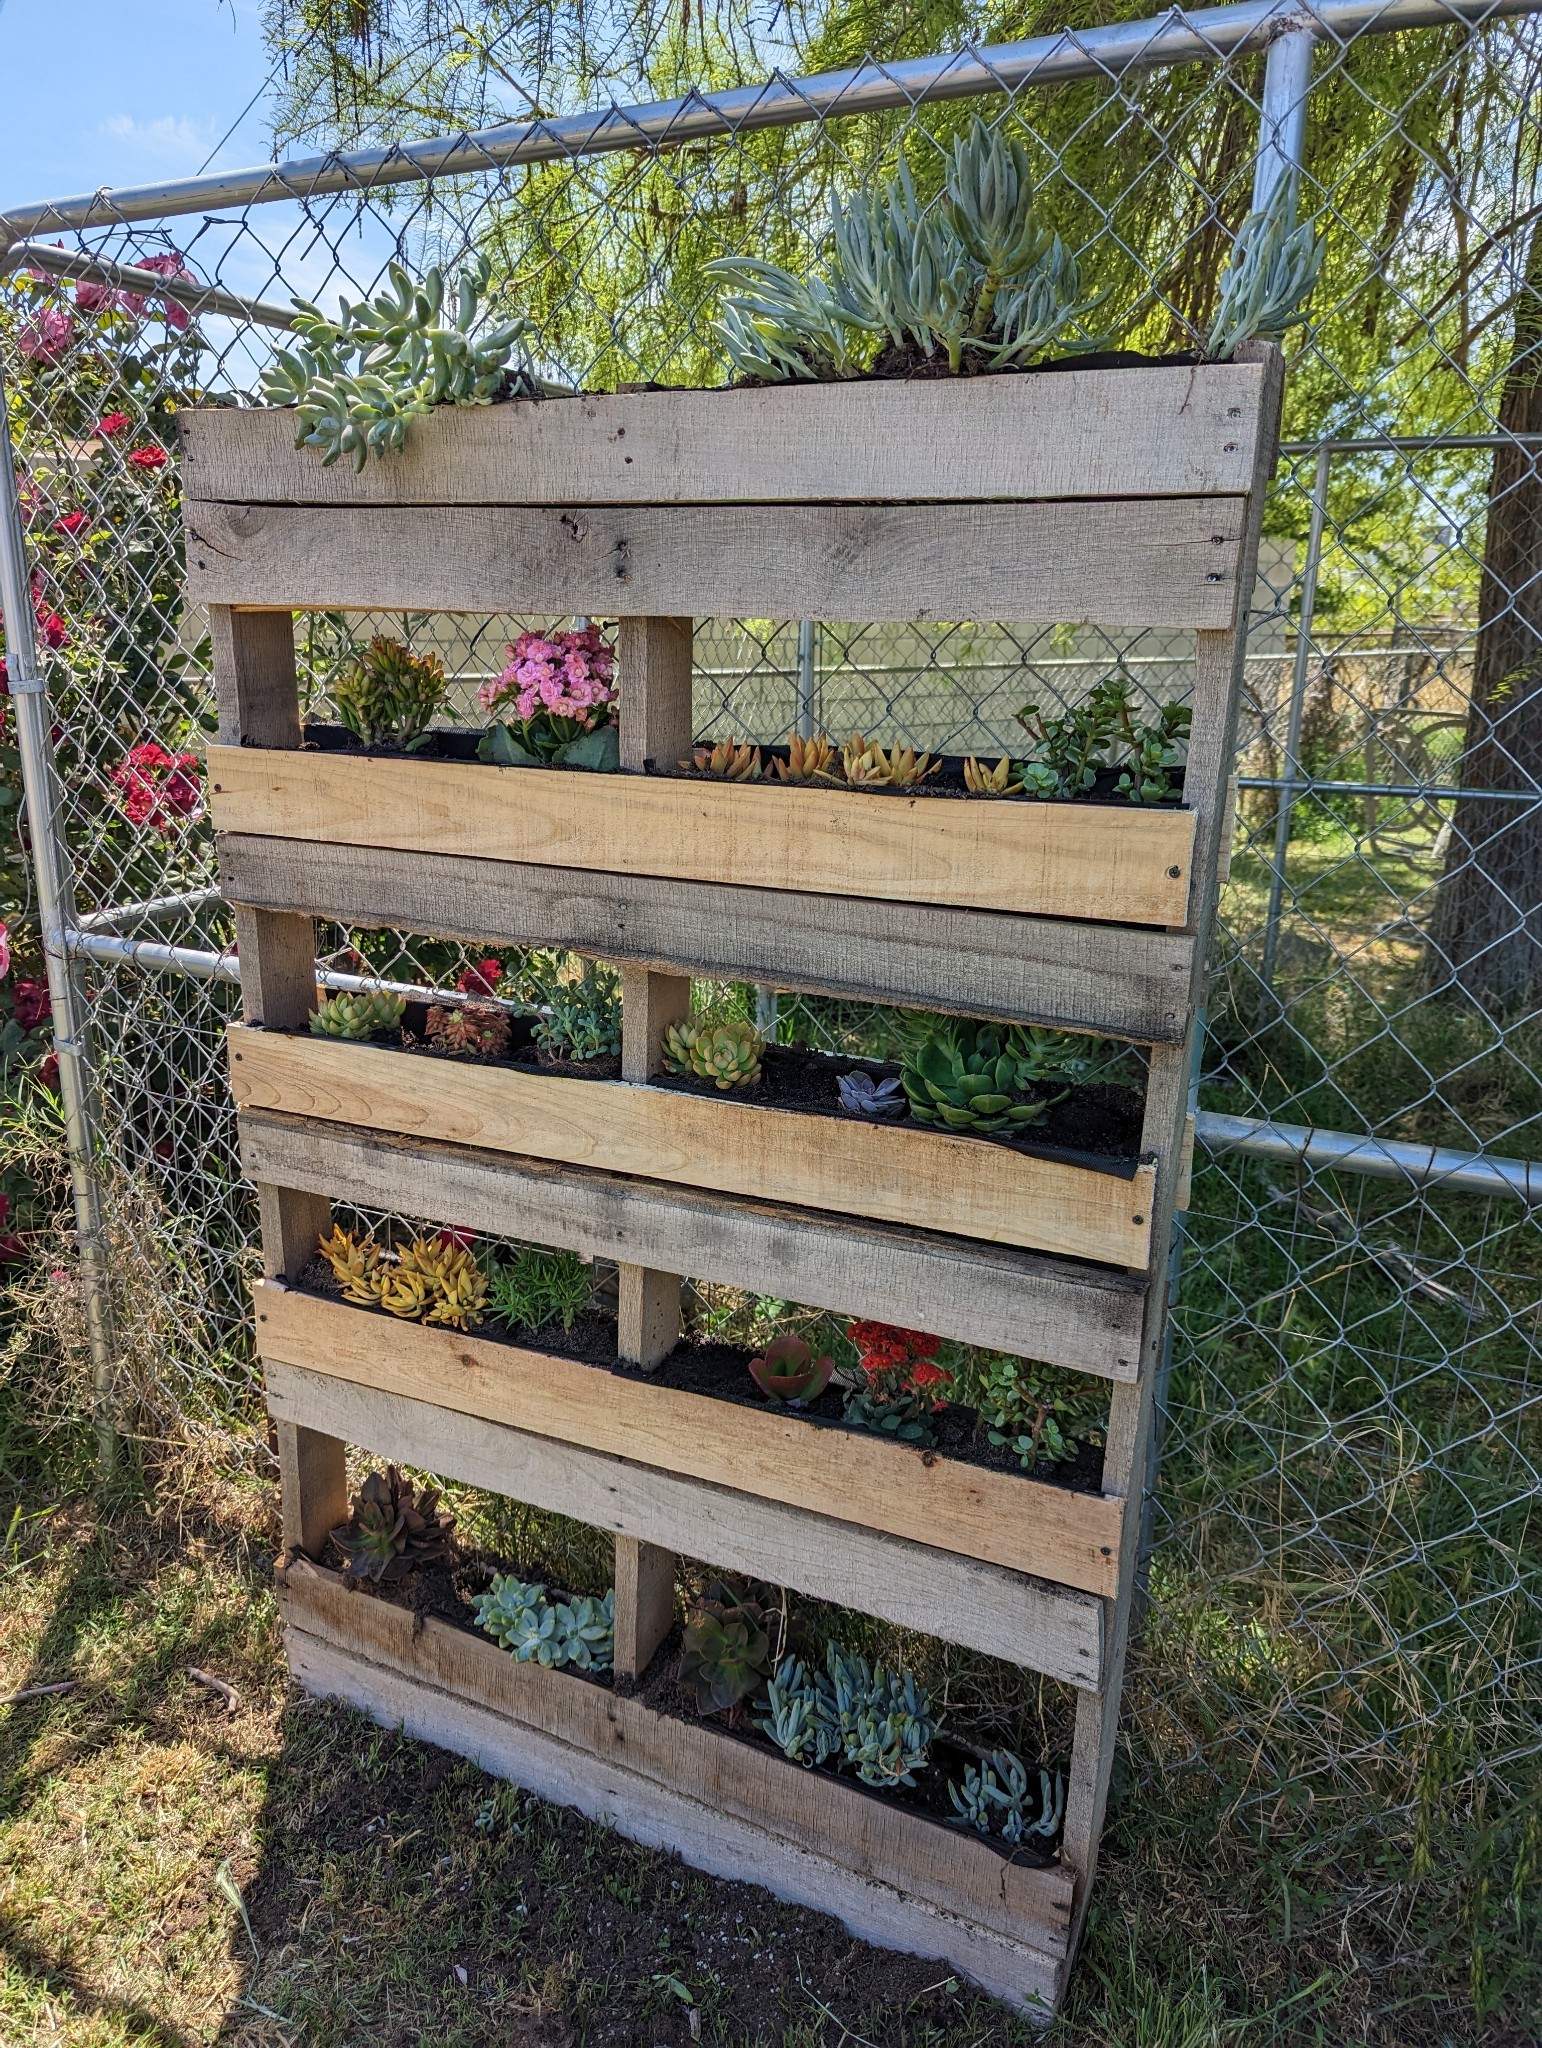 Daddy built me a DIY succulent garden out of a repurposed pallet. I love him so much,